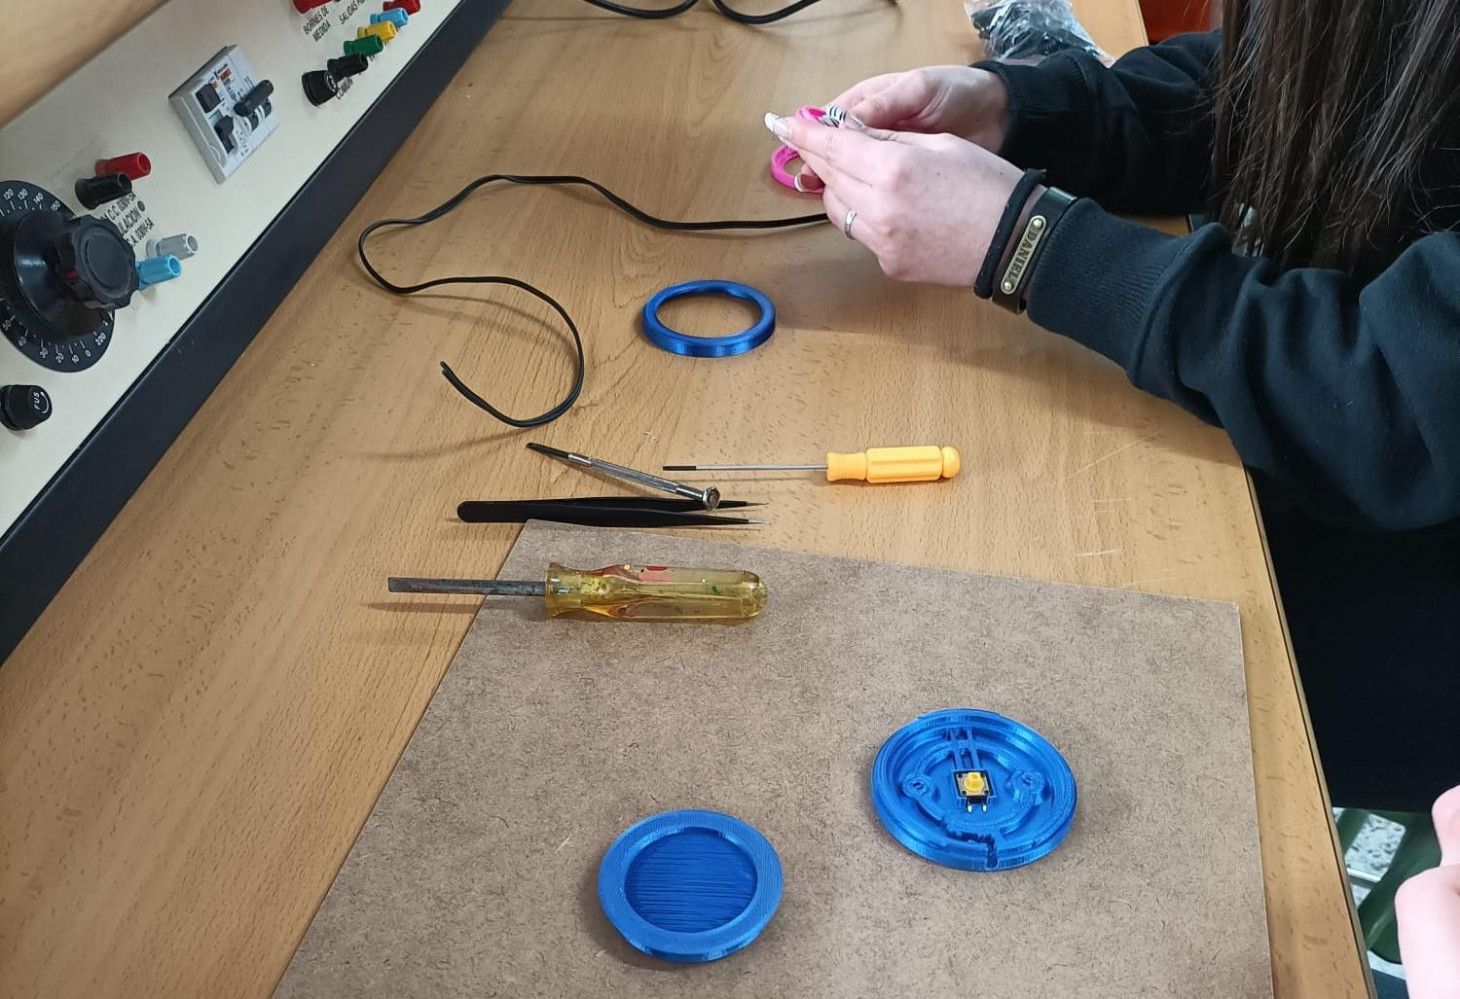 Manufacture of adapted buttons